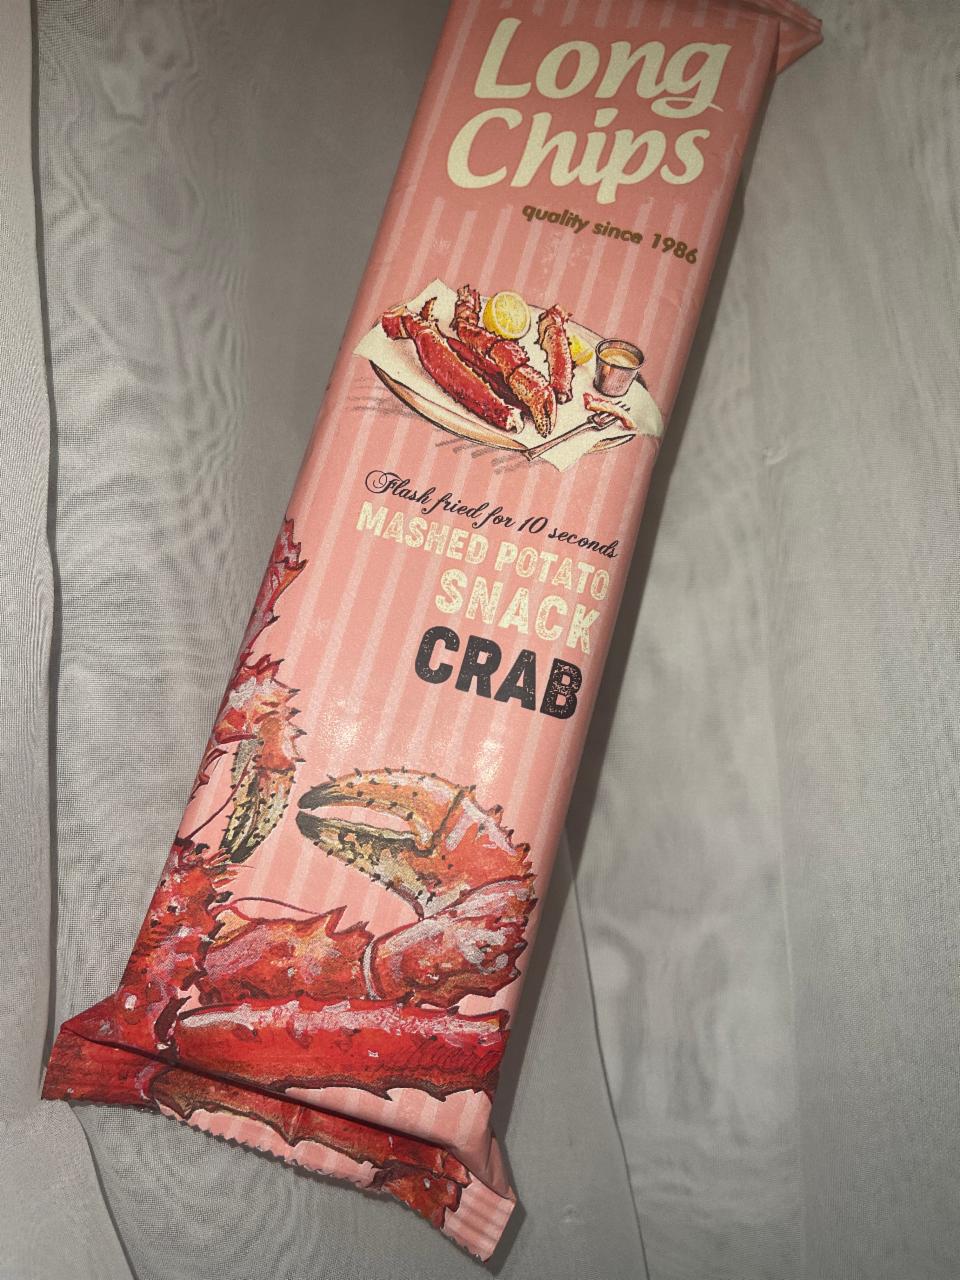 Фото - Mashed potato snack crab Long chips